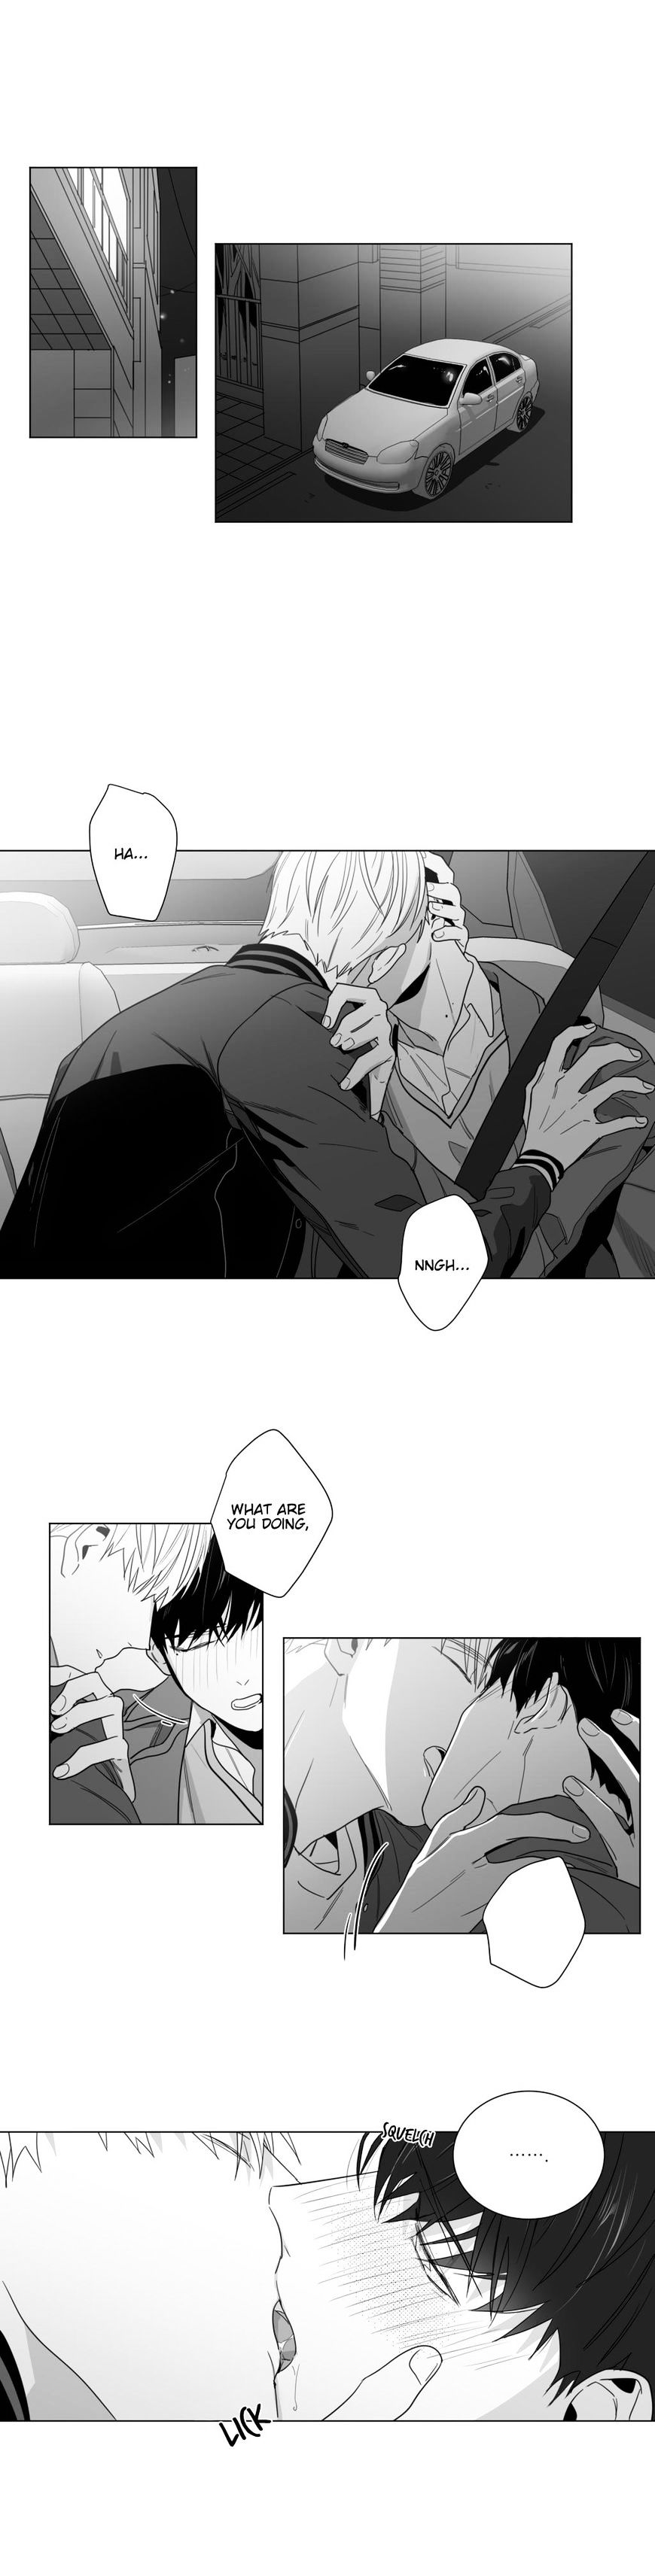 Lover Boy (Jeky) - Page 2